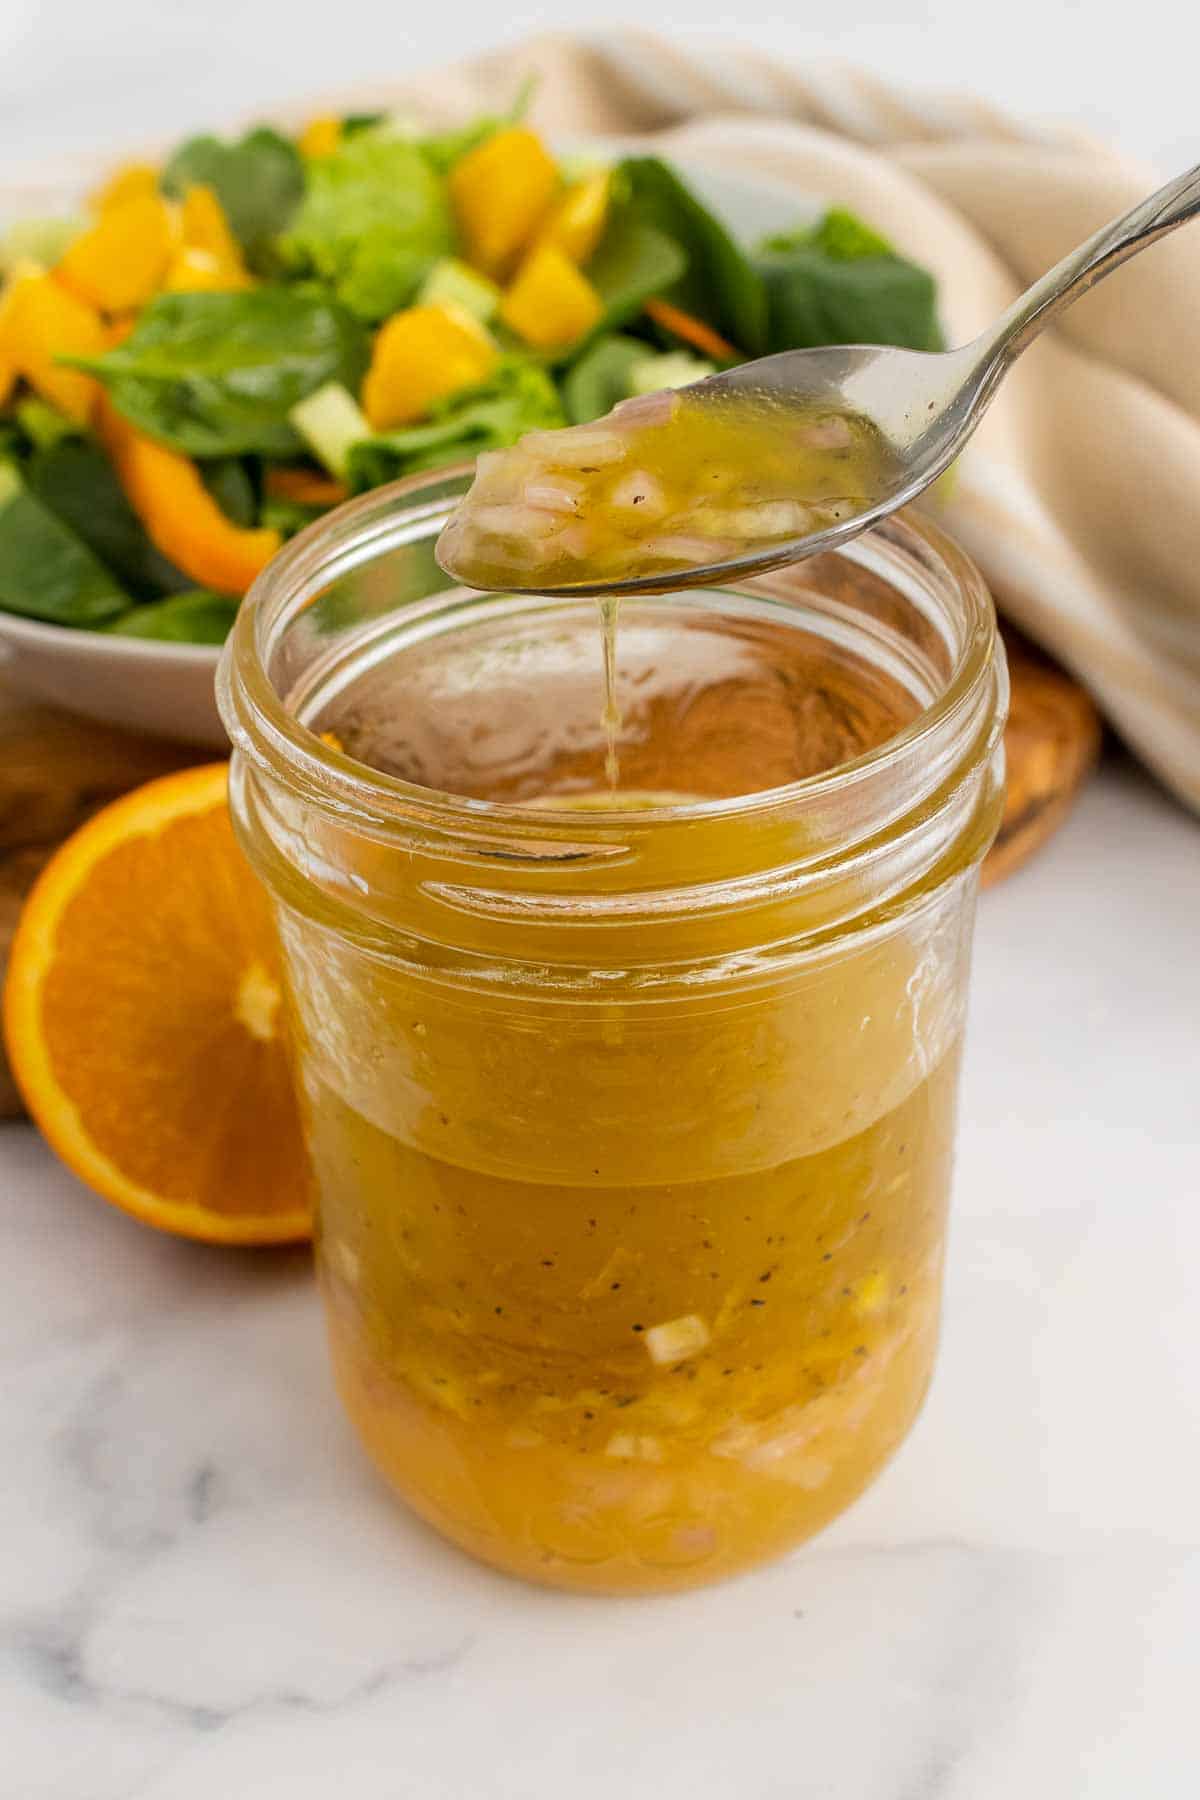 Spoon with homemade citrus vinaigrette above glass jar in front of salad